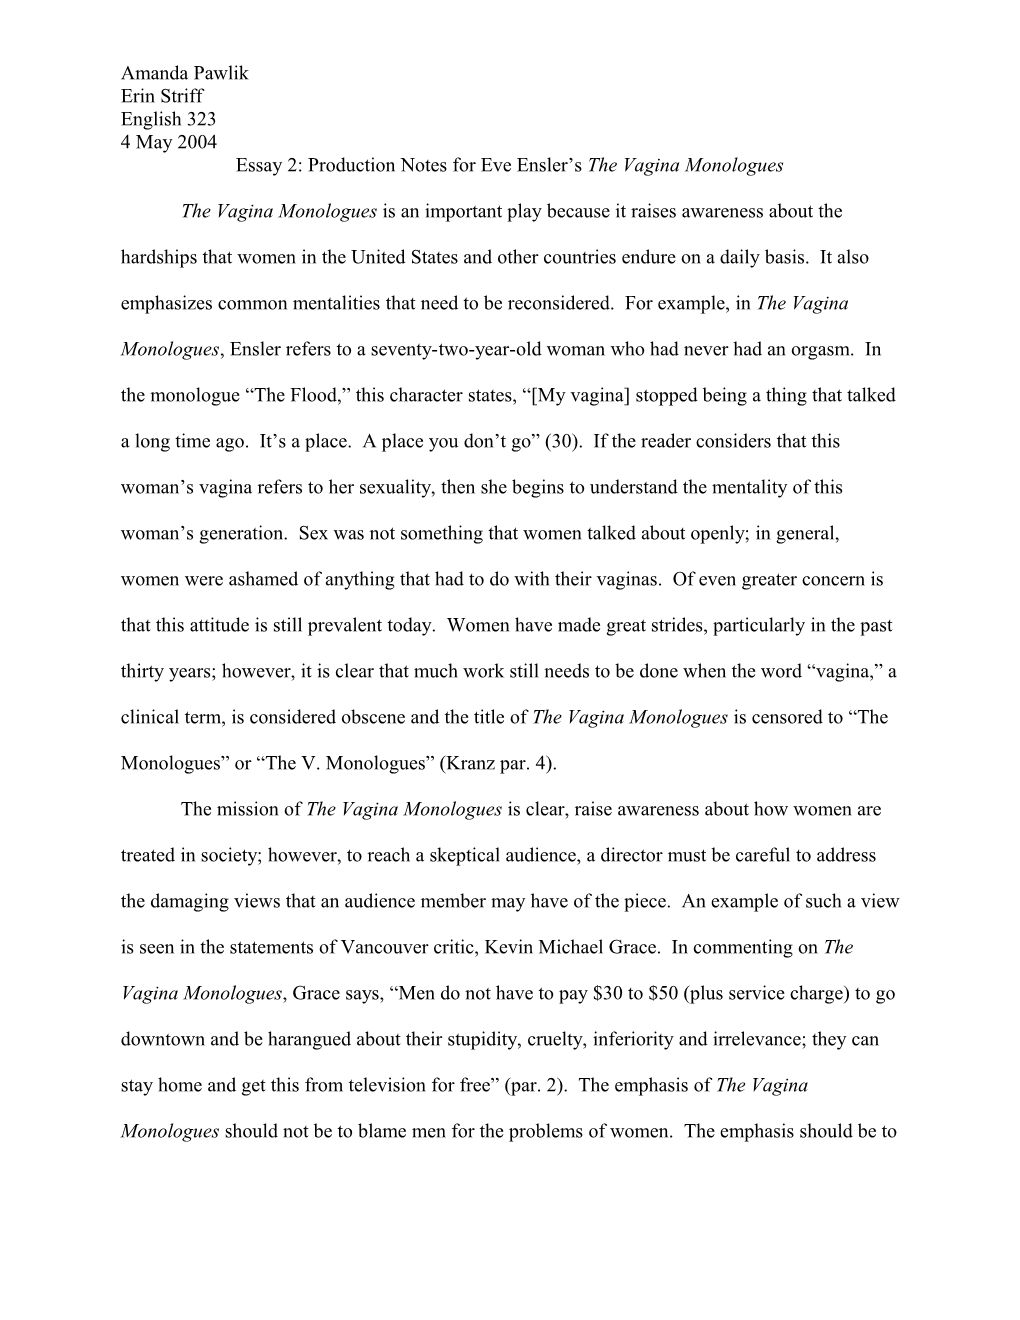 Essay 2: Production Notes for Eve Ensler S the Vagina Monologues